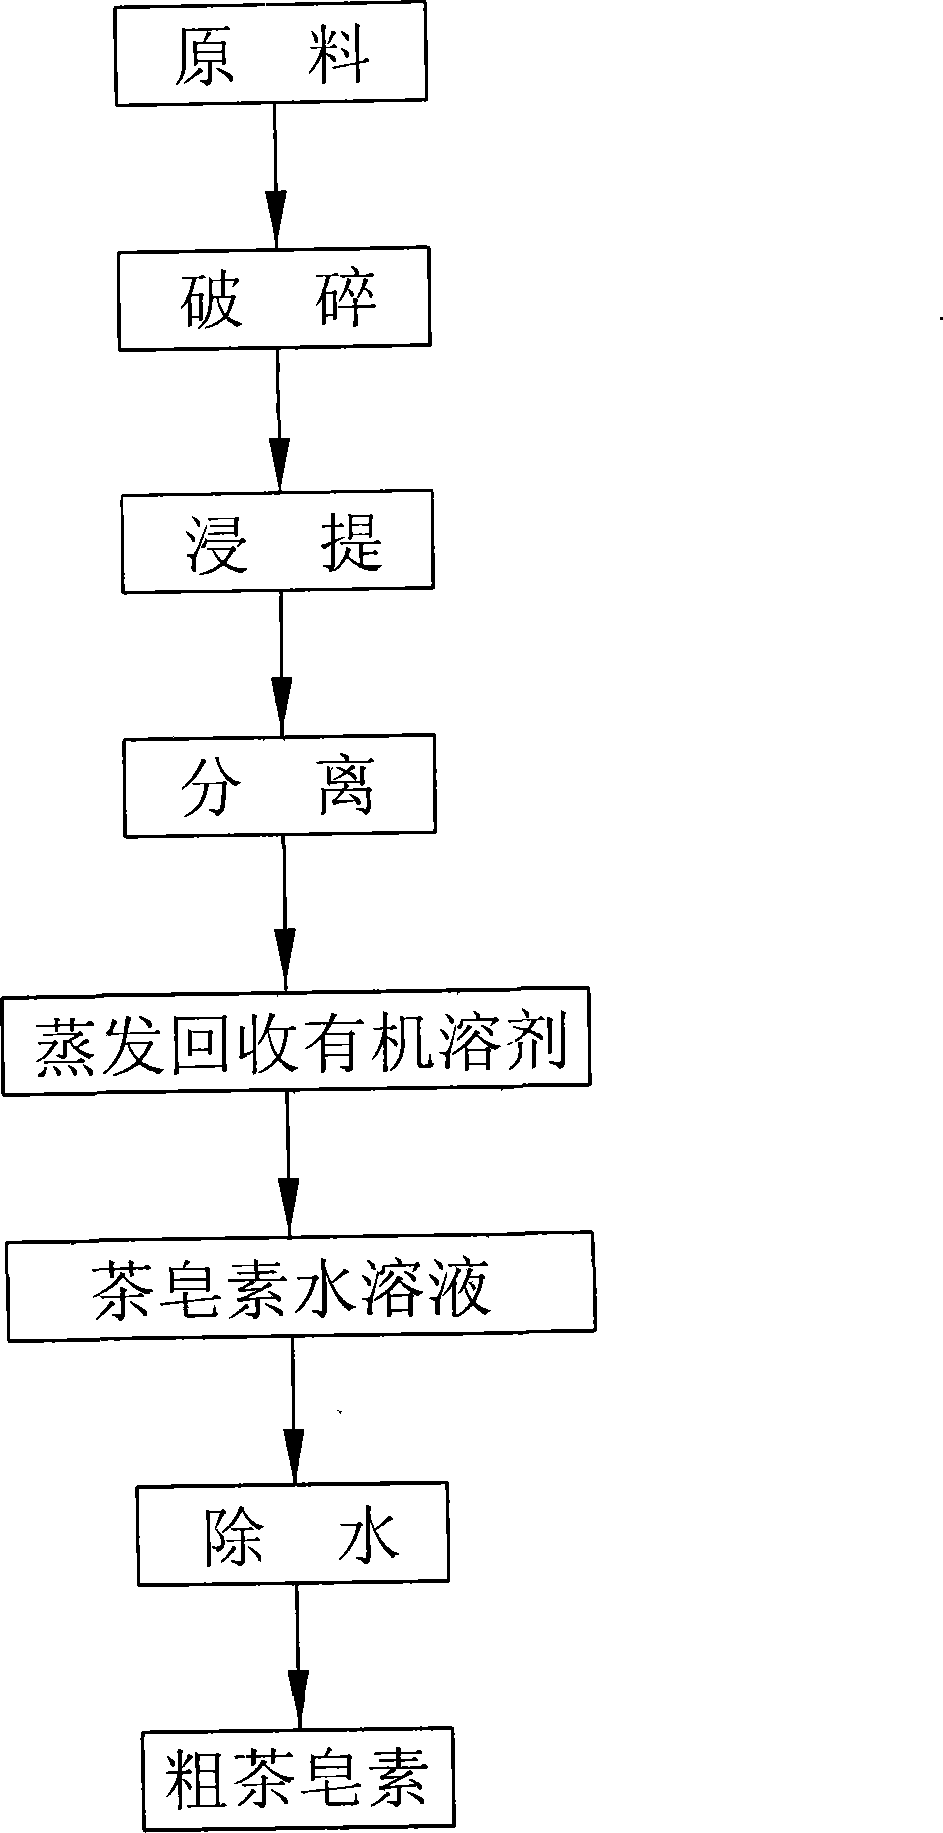 Method for directly extracting tea saponin from tea seeds